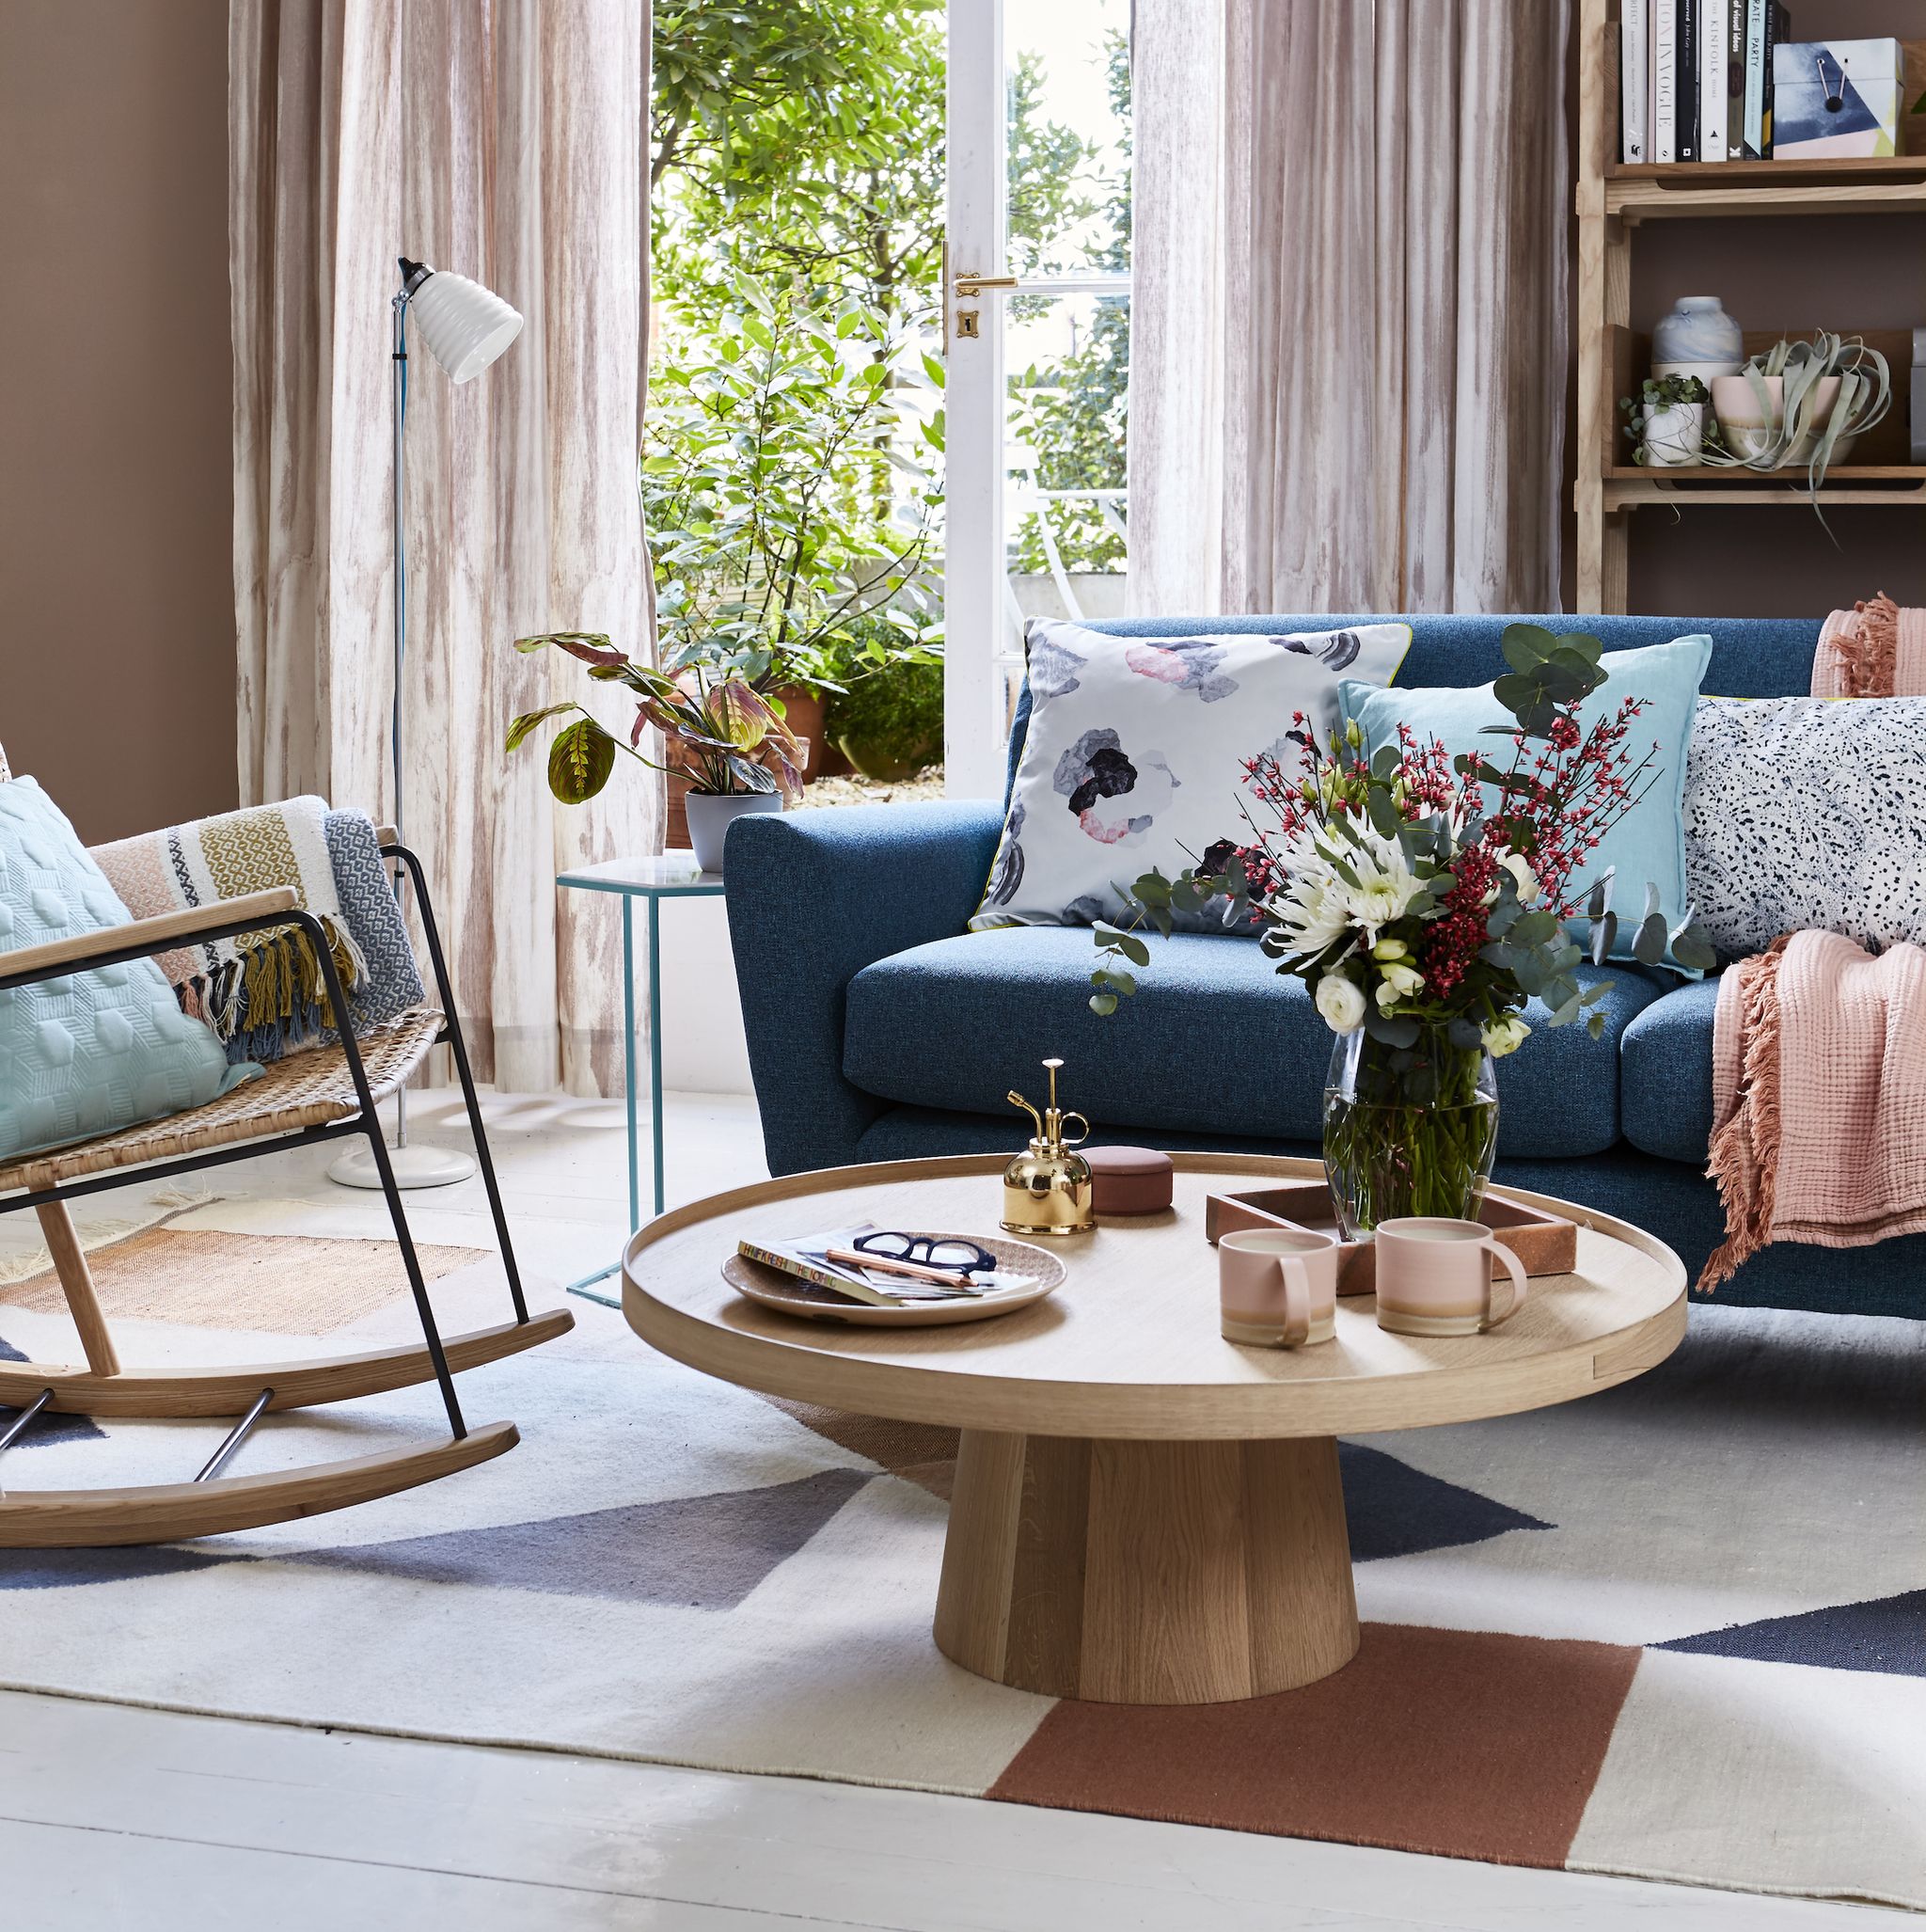 interior shot of a sitting room sofa and coffee tableliving room team a mid century style sofa with a pared back circularcoffee table for elegant simplicity lightweight full length curtains in aneutral colour bring softness and an airy feel to the room